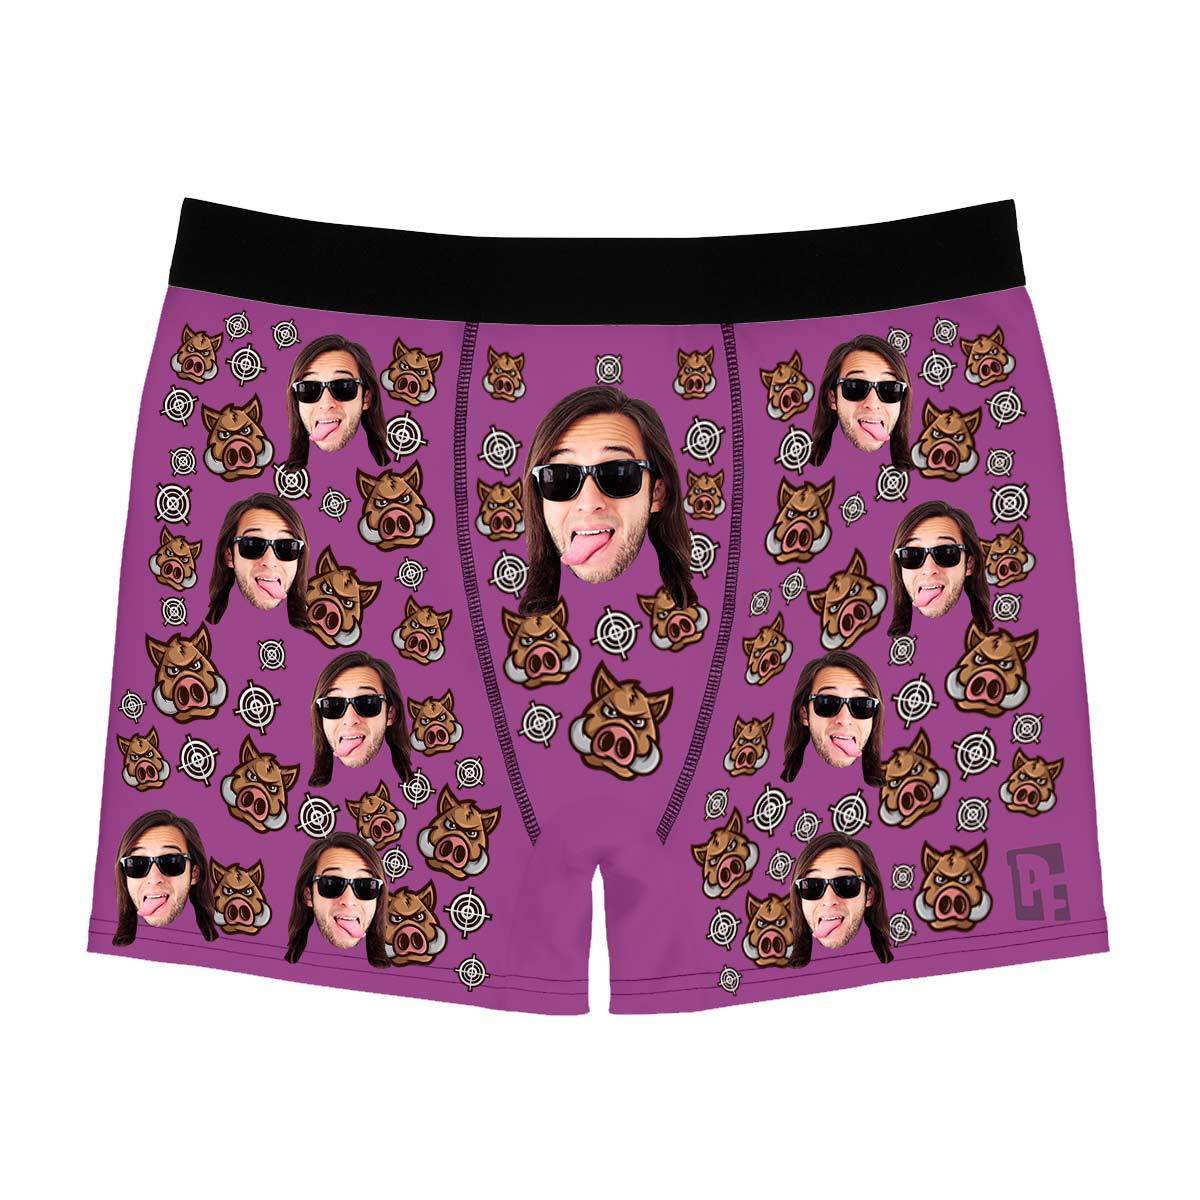 Purple Boar Hunter men's boxer briefs personalized with photo printed on them